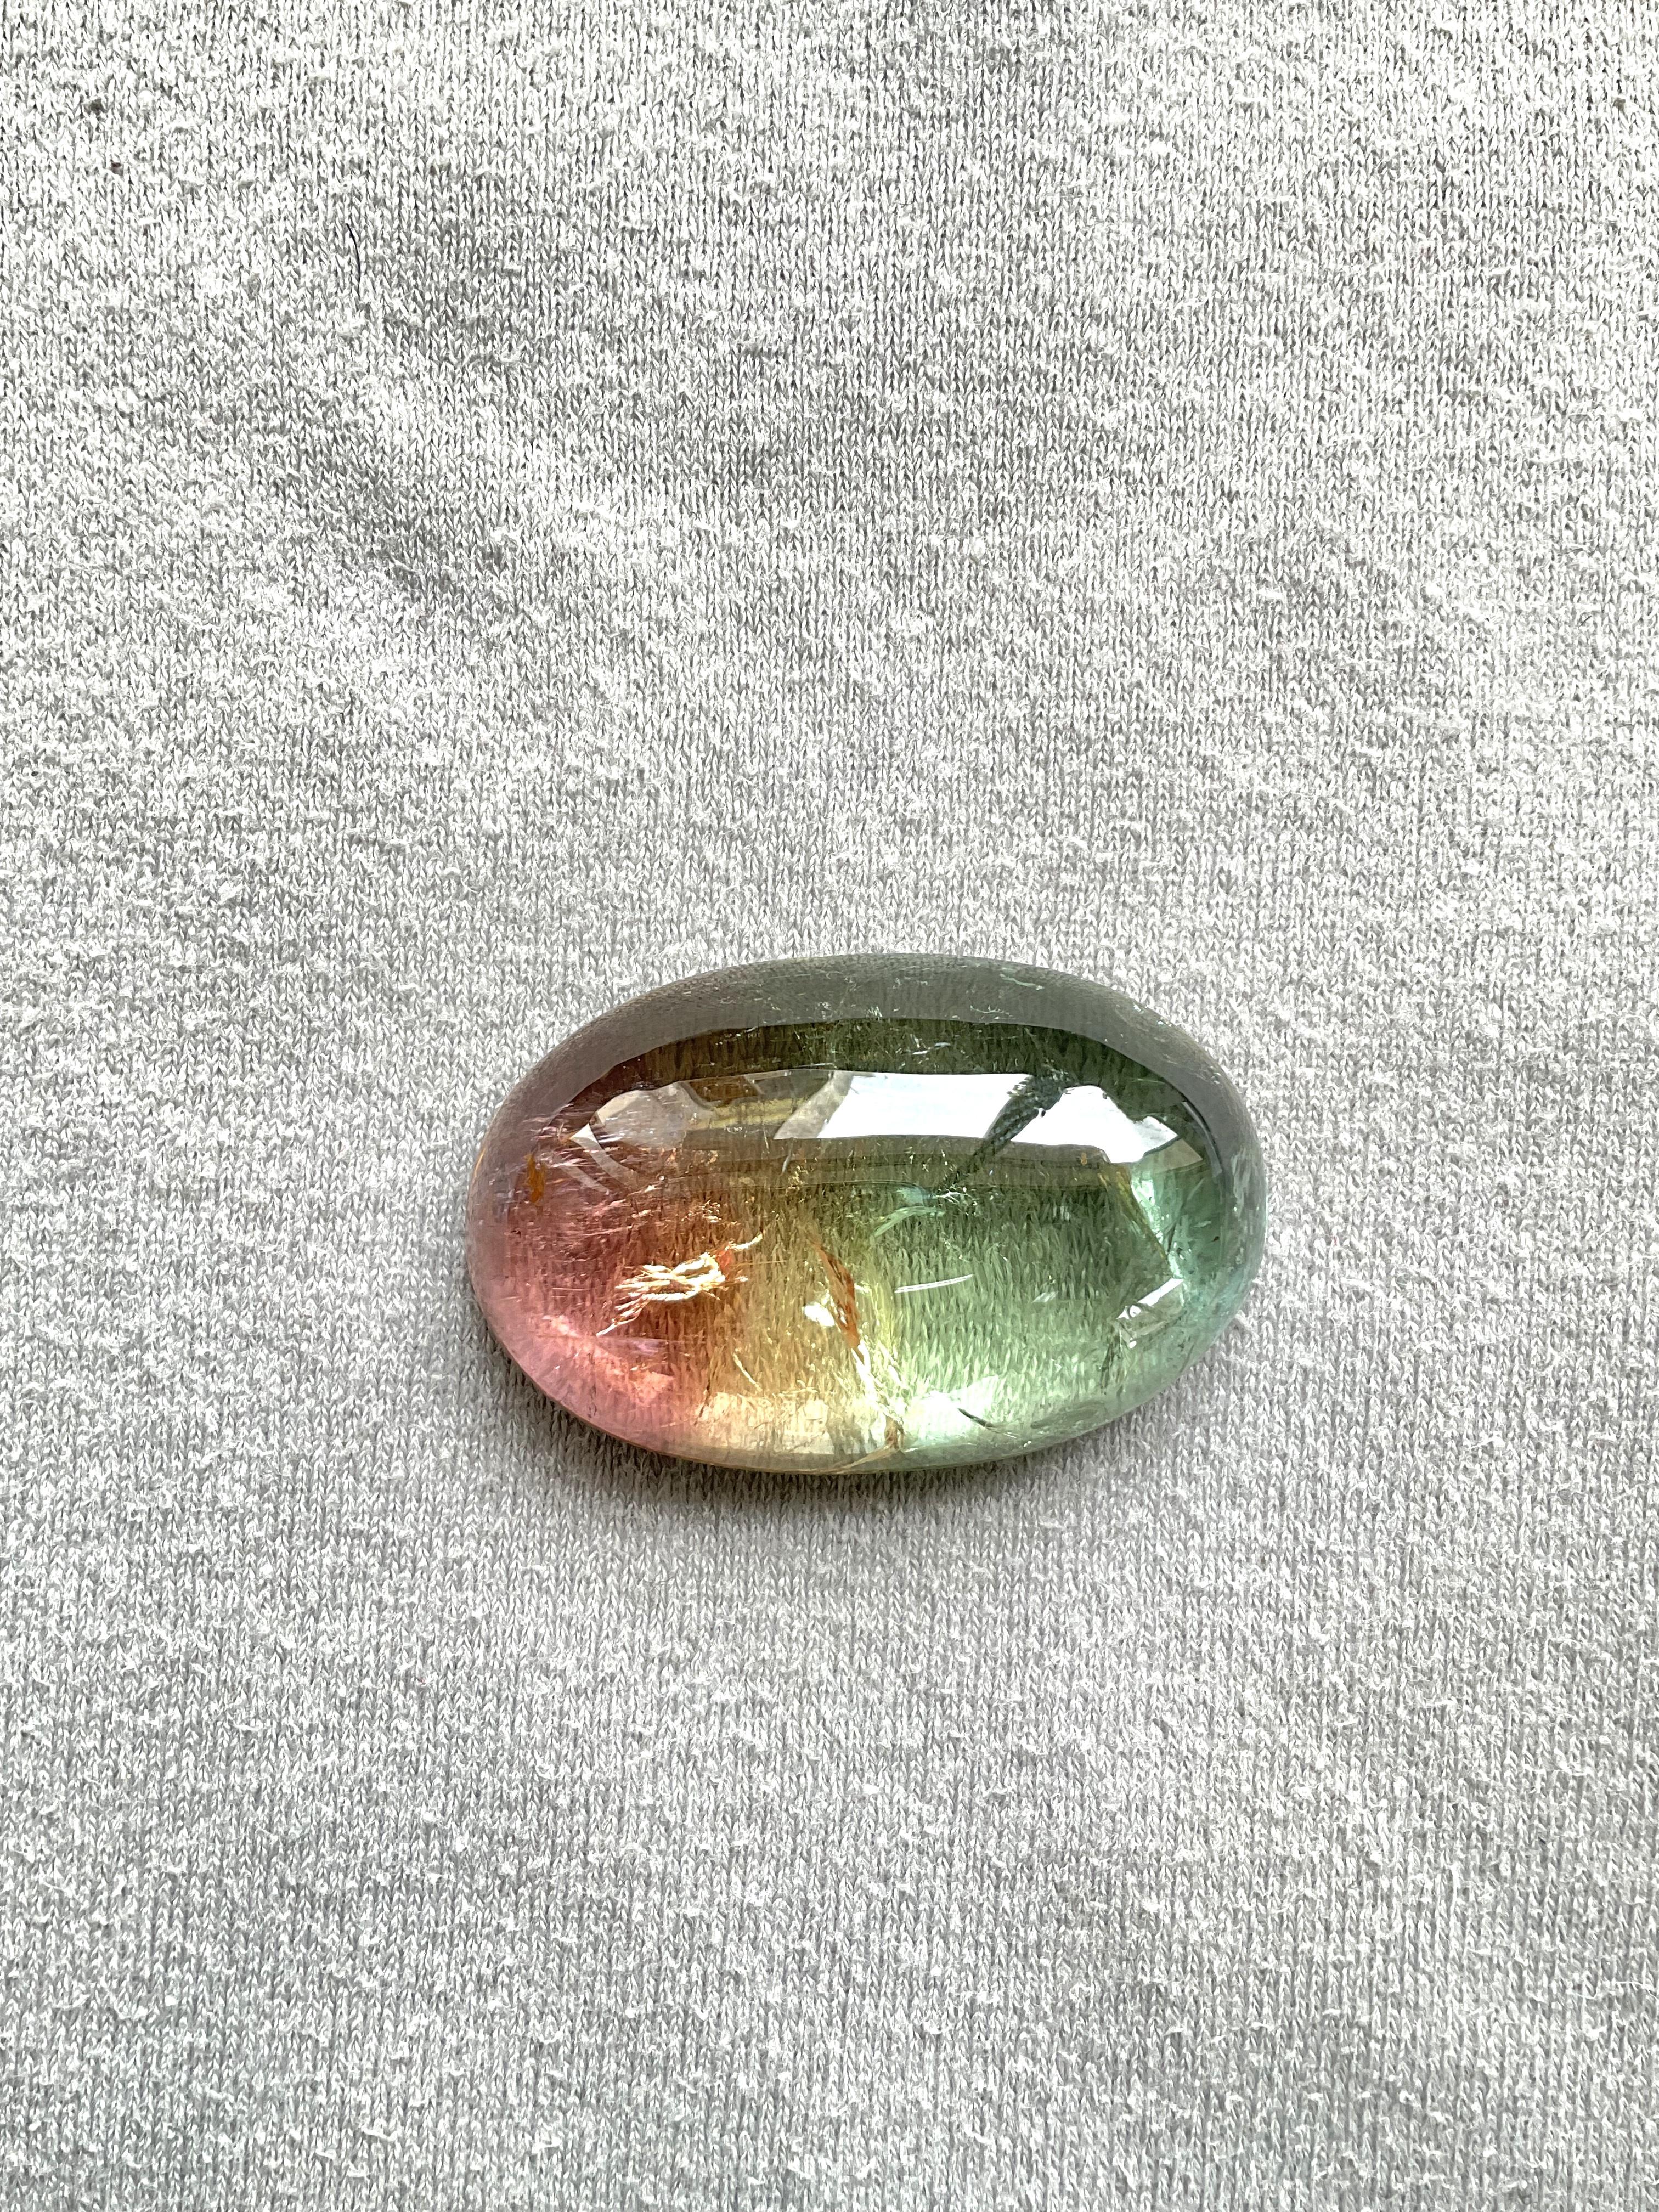 Oval Cut 105.03 Carats Bi Color Tourmaline Oval cabochon very good quality color variety For Sale